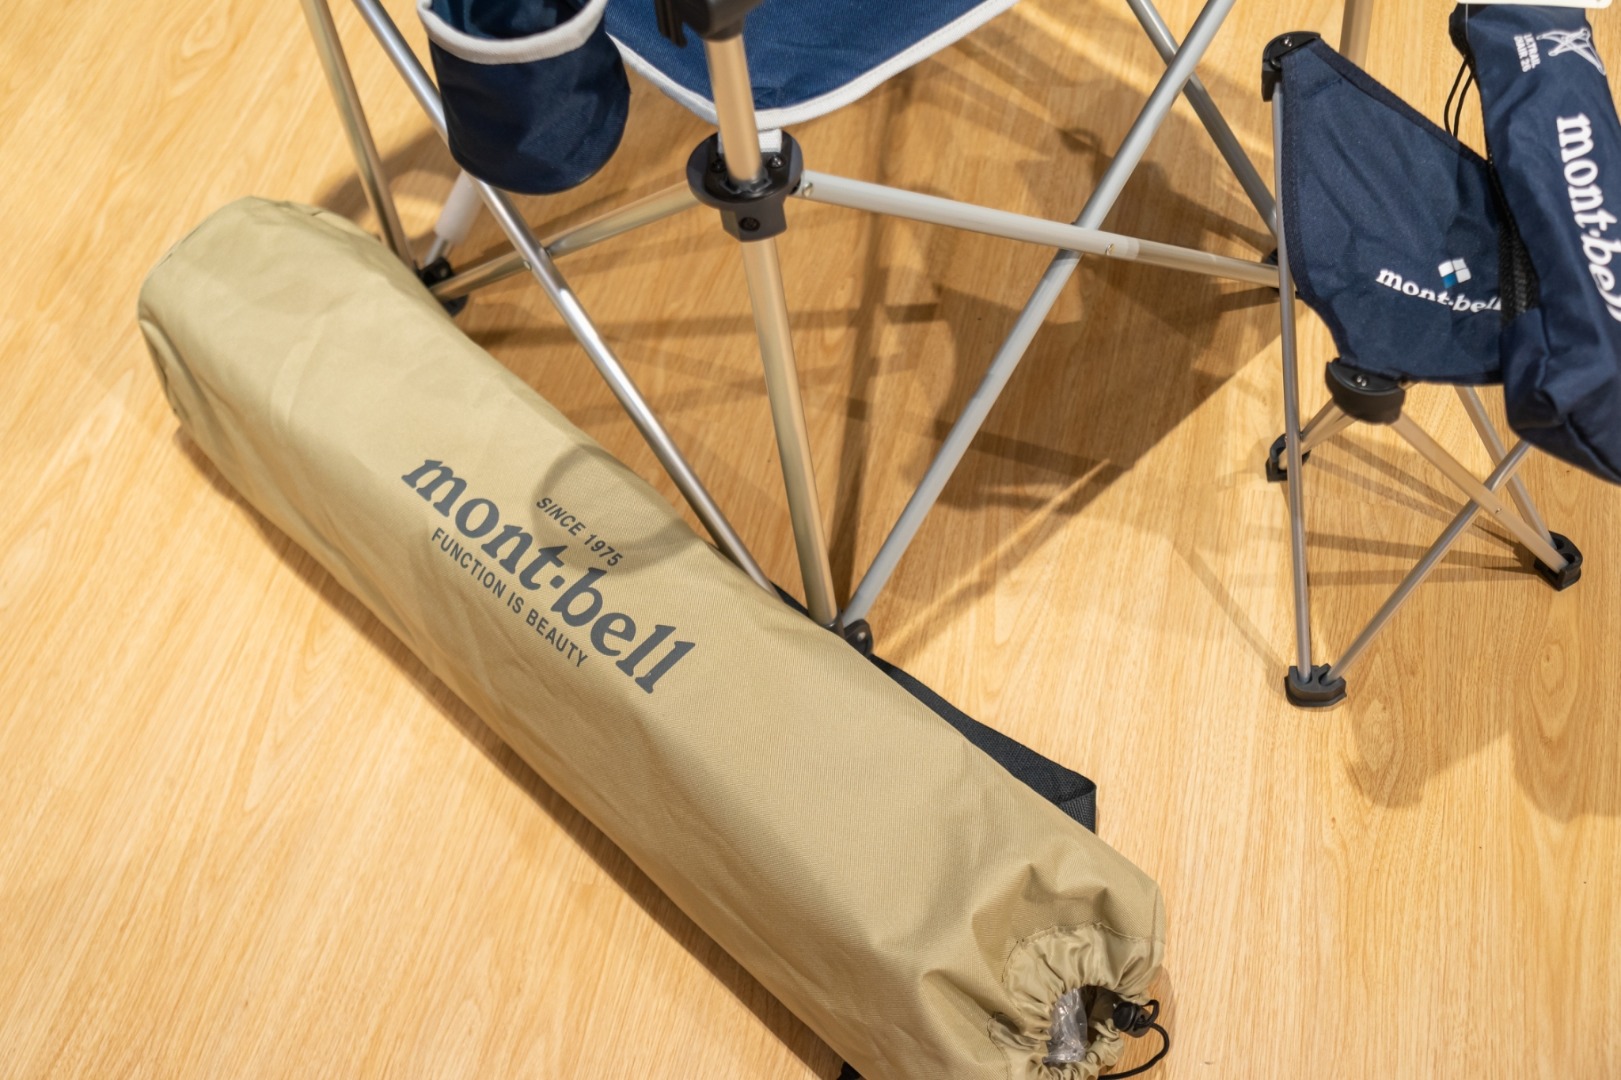 Montbell Flagship Store